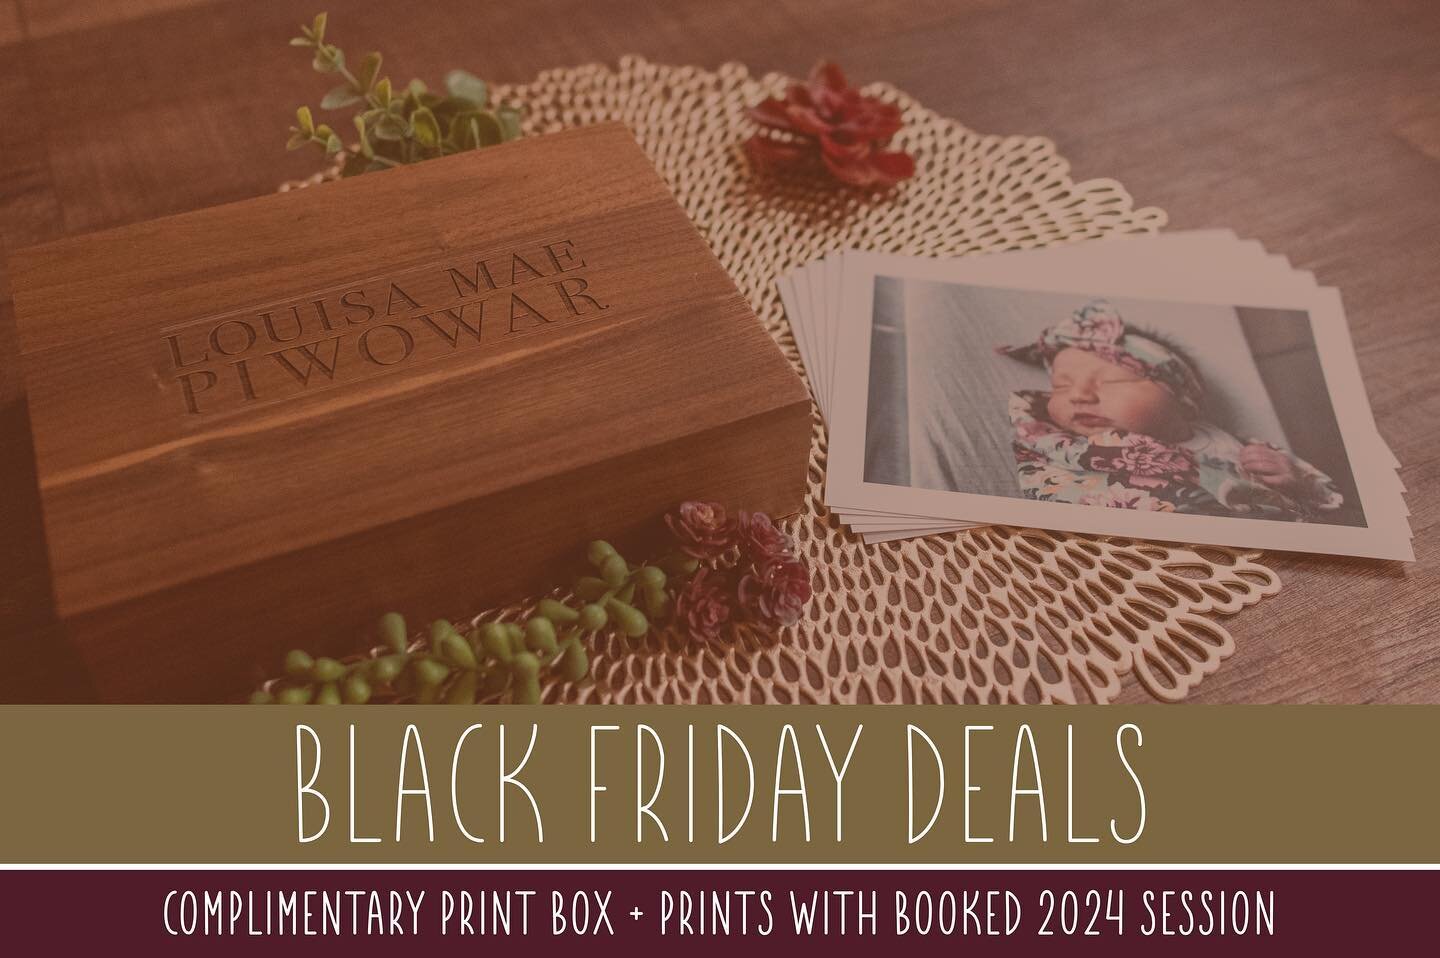 Have you been on the fence about booking a birth or documentary session? Well now is the perfect time to jump on my calendar! Today through Monday 11/27, enjoy a complimentary personalized 4x6 walnut print box + prints from your session when you book